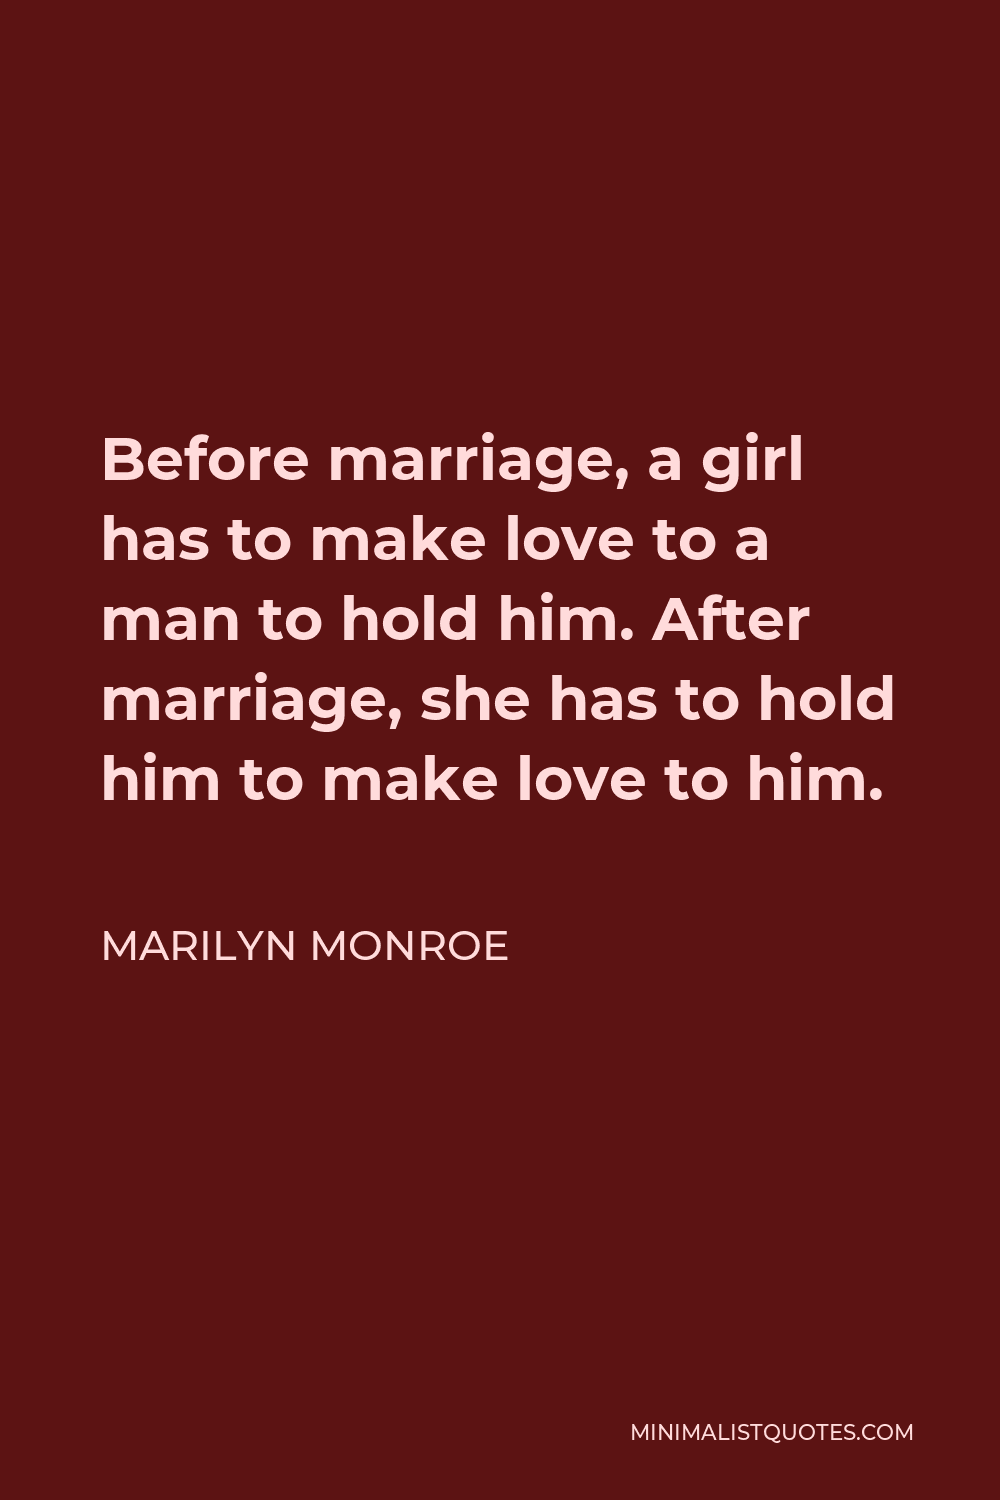 Marilyn Monroe Quote - Before marriage, a girl has to make love to a man to hold him. After marriage, she has to hold him to make love to him.